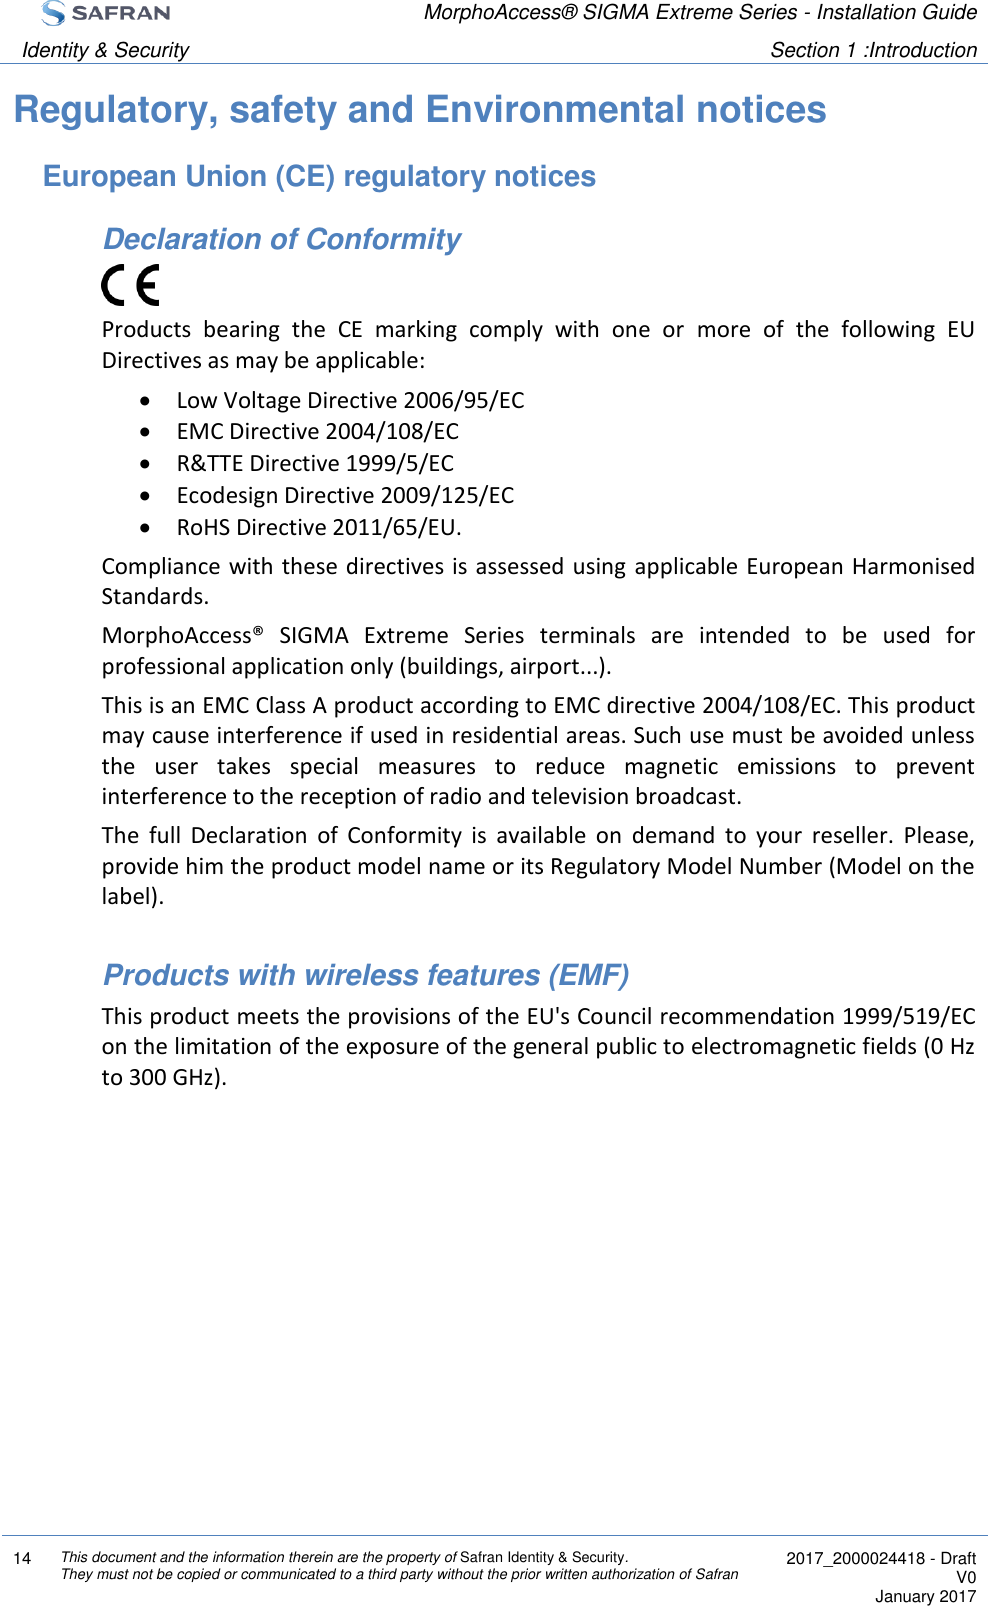  MorphoAccess® SIGMA Extreme Series - Installation Guide  Identity &amp; Security Section 1 :Introduction  14 This document and the information therein are the property of Safran Identity &amp; Security. They must not be copied or communicated to a third party without the prior written authorization of Safran  2017_2000024418 - Draft V0 January 2017  Regulatory, safety and Environmental notices European Union (CE) regulatory notices Declaration of Conformity  Products  bearing  the  CE  marking  comply  with  one  or  more  of  the  following  EU Directives as may be applicable:  Low Voltage Directive 2006/95/EC  EMC Directive 2004/108/EC  R&amp;TTE Directive 1999/5/EC  Ecodesign Directive 2009/125/EC  RoHS Directive 2011/65/EU. Compliance with these directives is assessed using applicable European Harmonised Standards. MorphoAccess®  SIGMA  Extreme  Series  terminals  are  intended  to  be  used  for professional application only (buildings, airport...). This is an EMC Class A product according to EMC directive 2004/108/EC. This product may cause interference if used in residential areas. Such use must be avoided unless the  user  takes  special  measures  to  reduce  magnetic  emissions  to  prevent interference to the reception of radio and television broadcast. The  full  Declaration  of  Conformity  is  available  on  demand  to  your  reseller.  Please, provide him the product model name or its Regulatory Model Number (Model on the label).  Products with wireless features (EMF) This product meets the provisions of the EU&apos;s Council recommendation 1999/519/EC on the limitation of the exposure of the general public to electromagnetic fields (0 Hz to 300 GHz).   